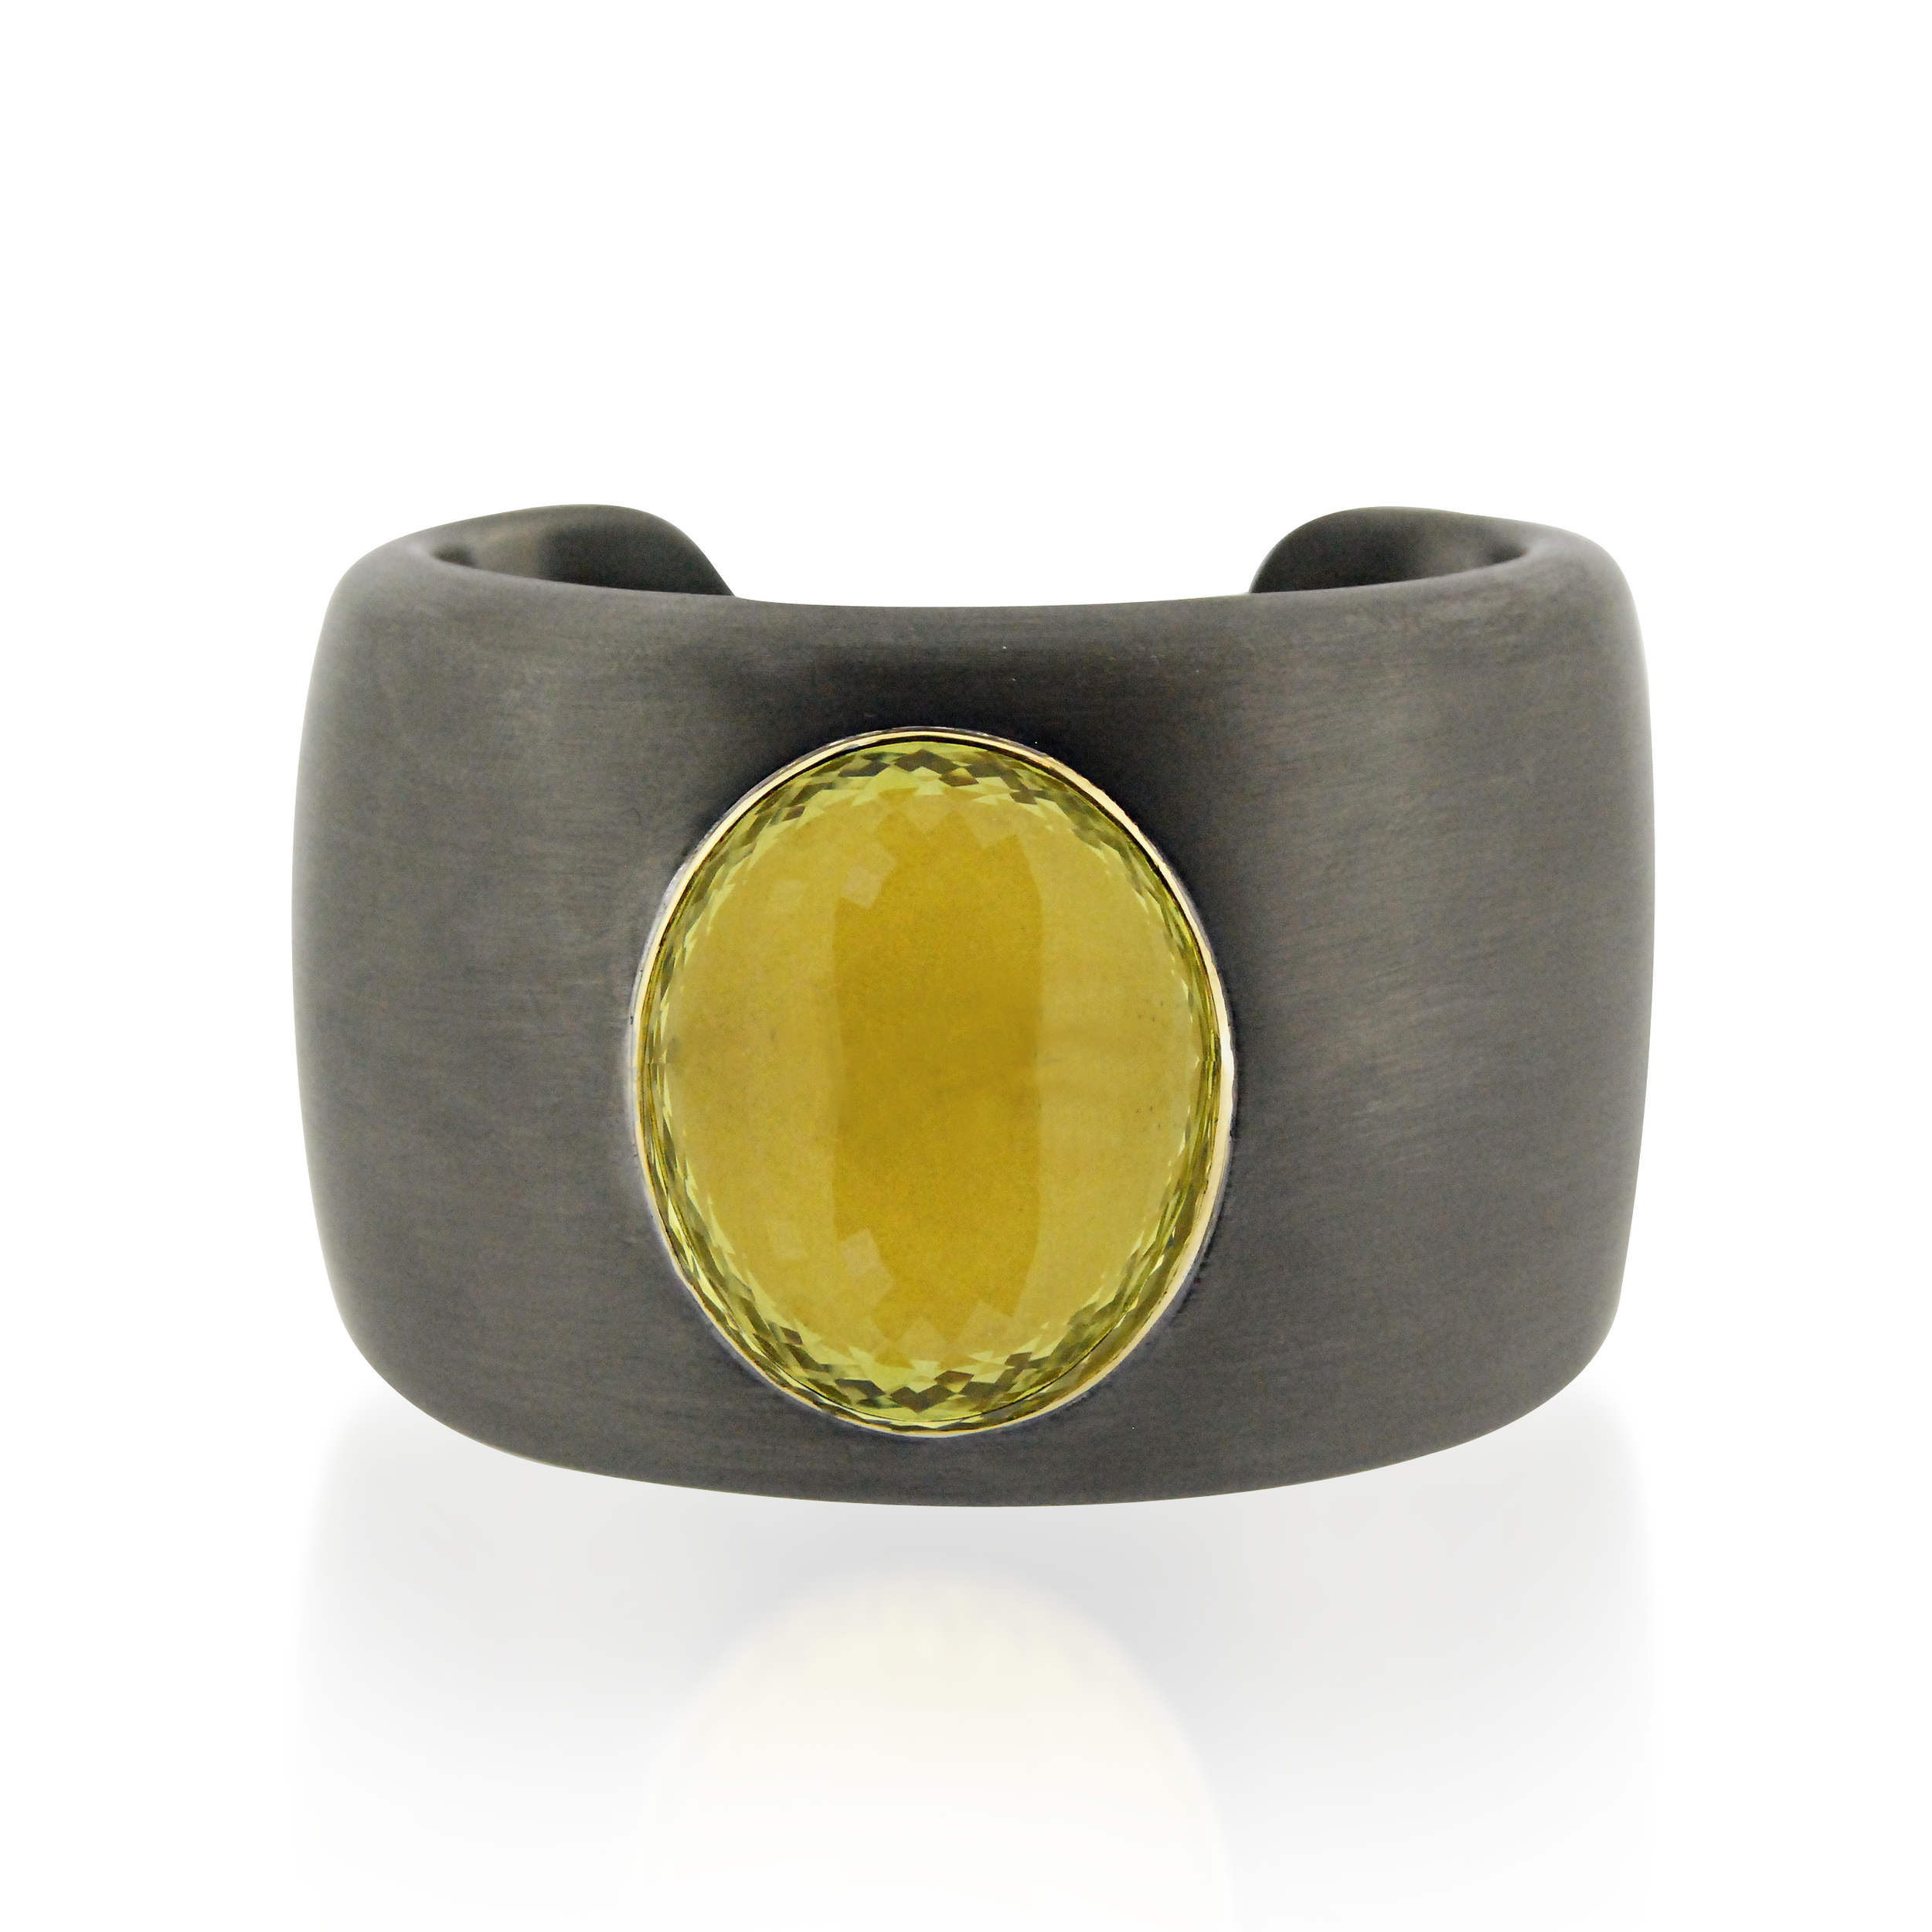 Citrine-and-blackened-silver-cuff-bracelet-front-view.jpg